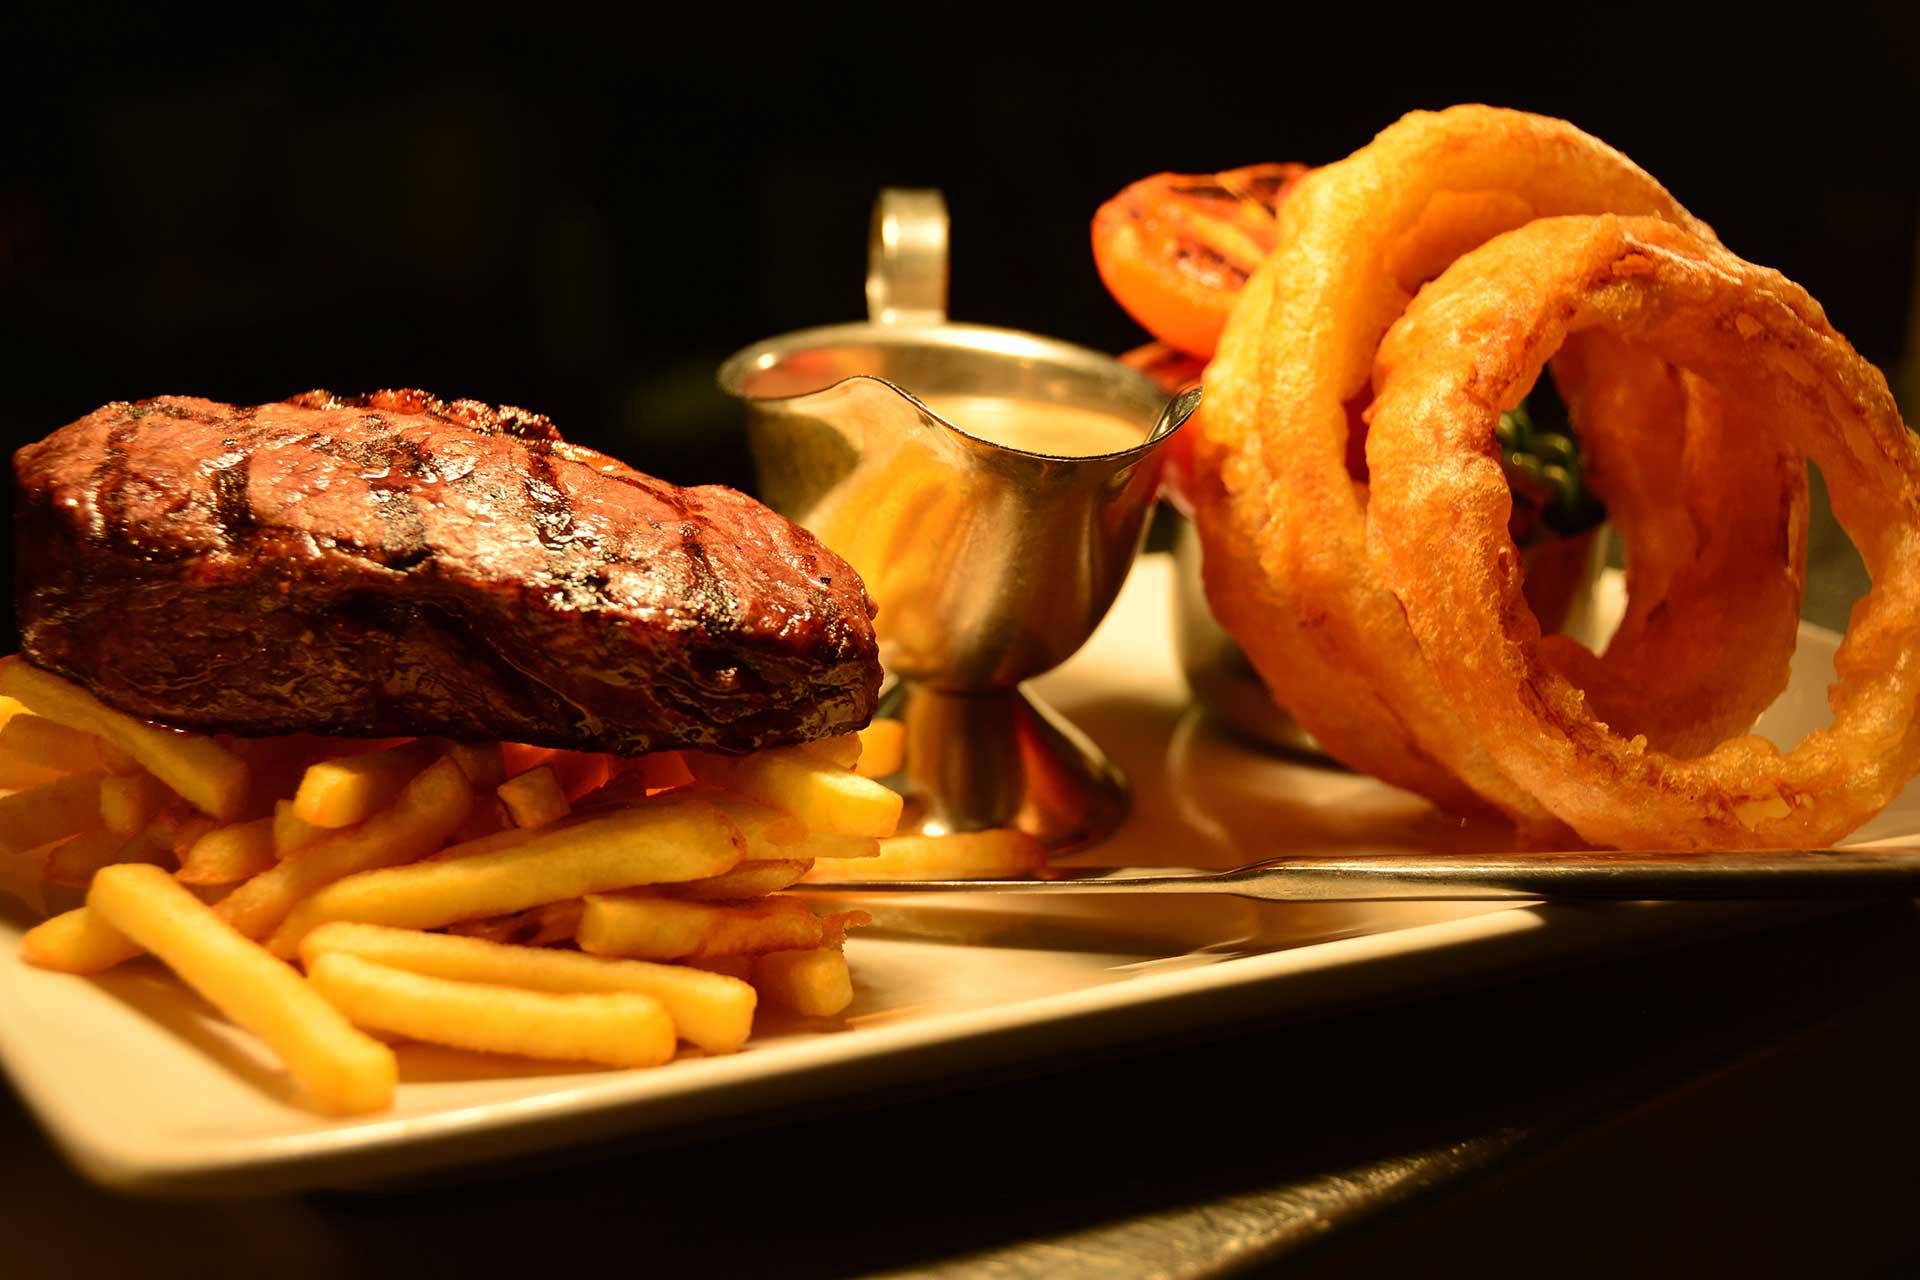 Enjoy delicious steaks at The Old Inn near Appin when you stay at Glencoe Hideaways